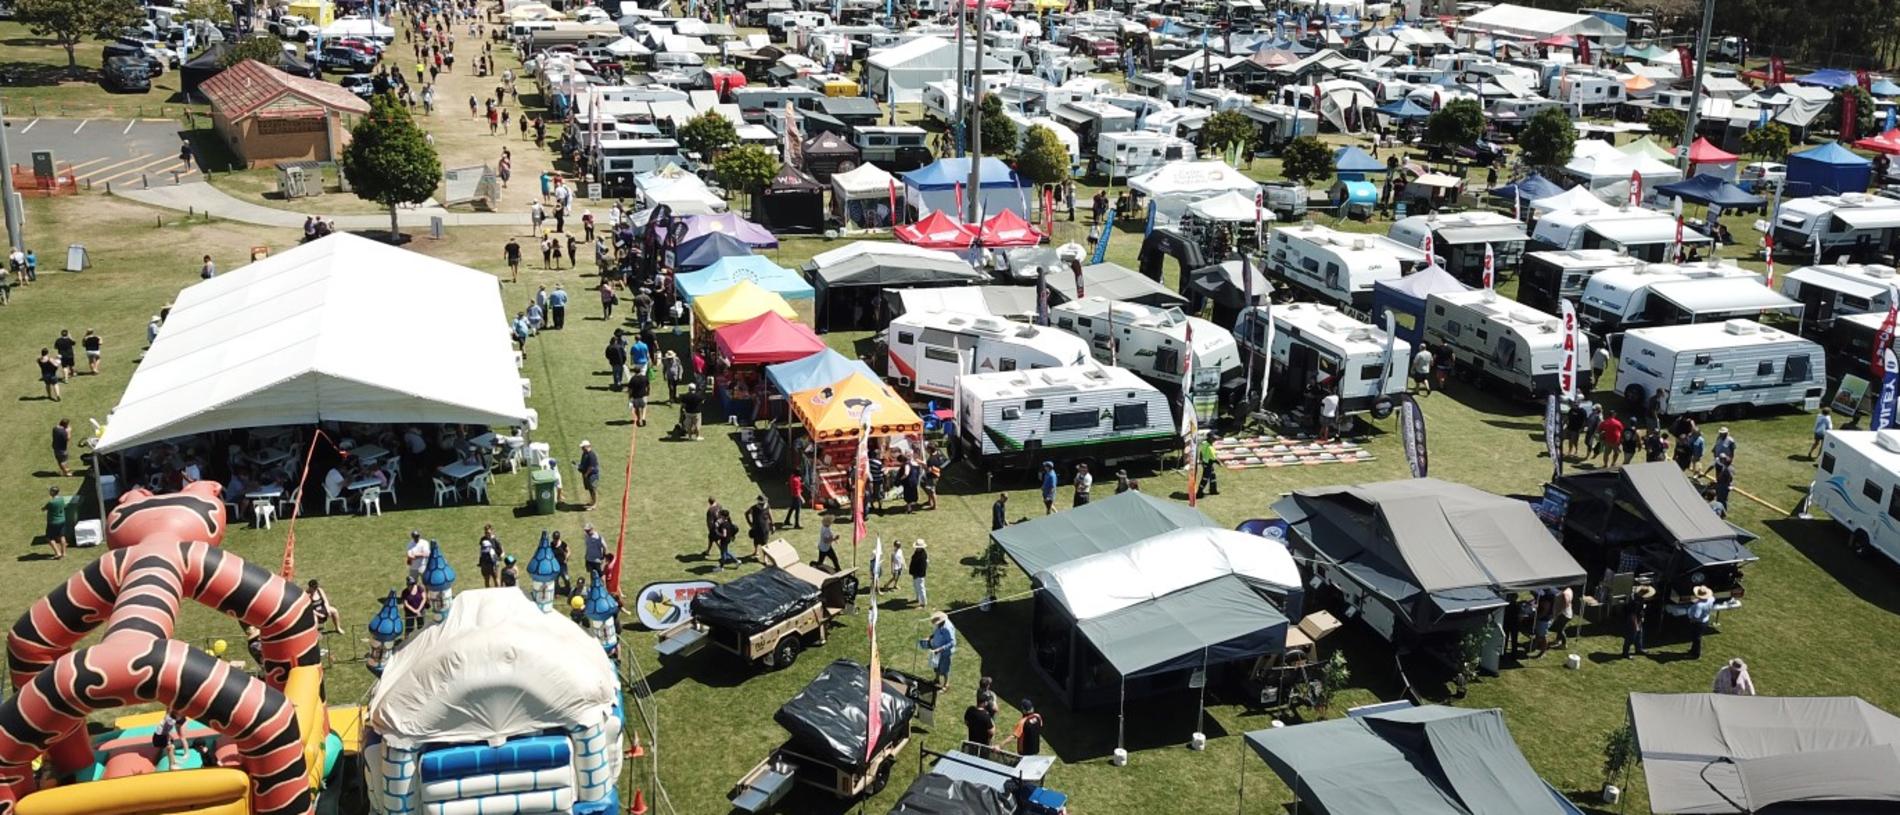 Cleveland Expo The latest is boating and camping technology The